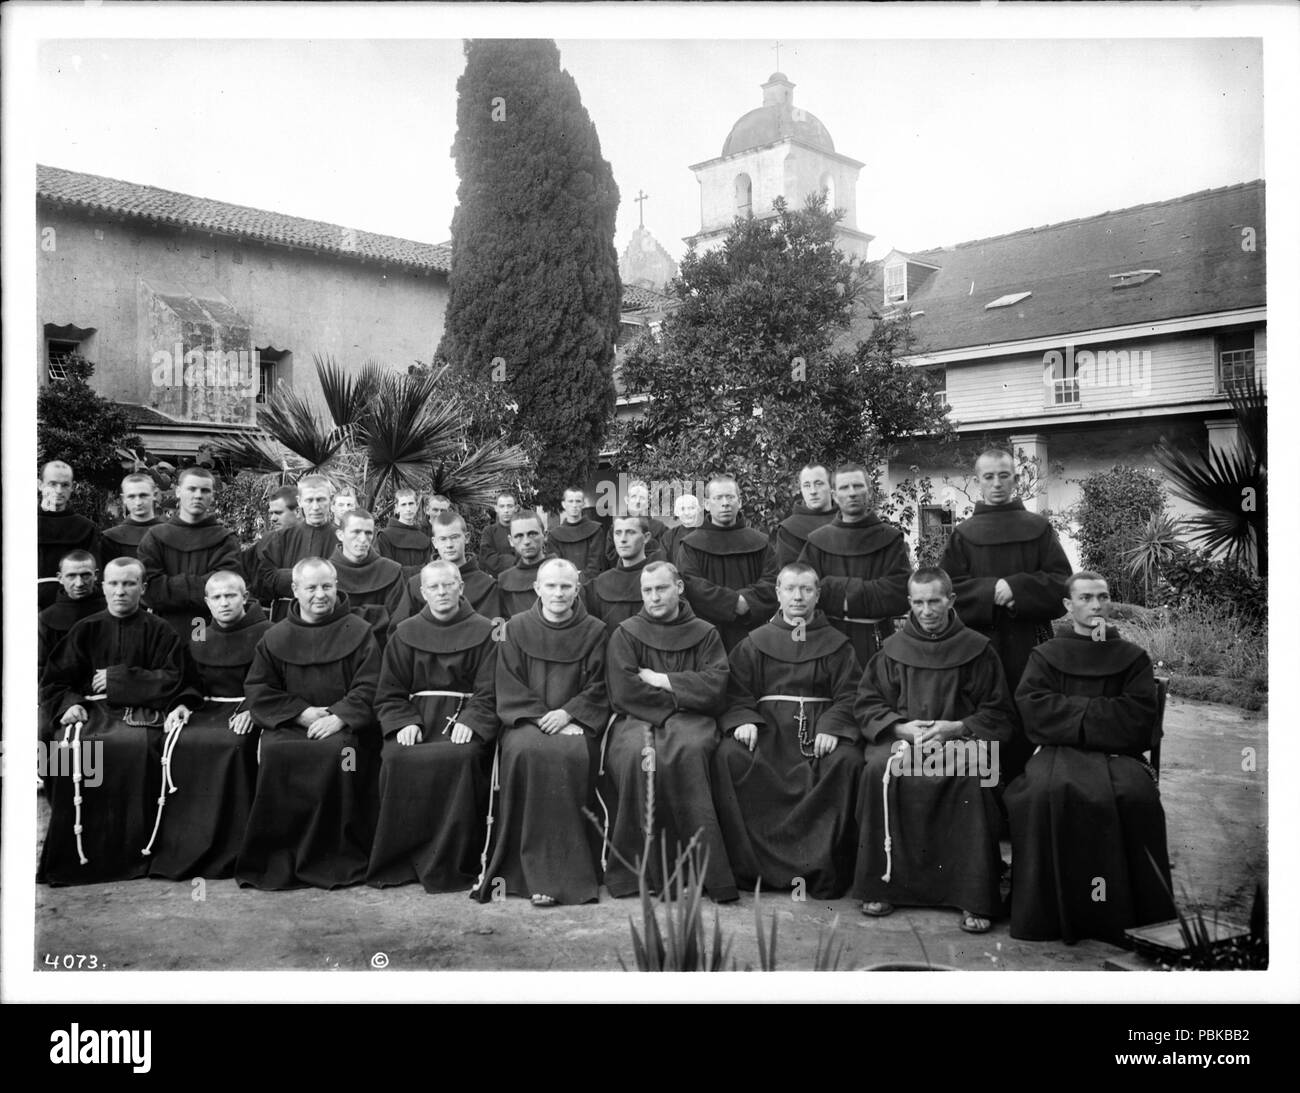 733 Group portrait of about 30 Franciscan monks outside at Mission Santa Barbara, California, 1904 (CHS-4073) Stock Photo